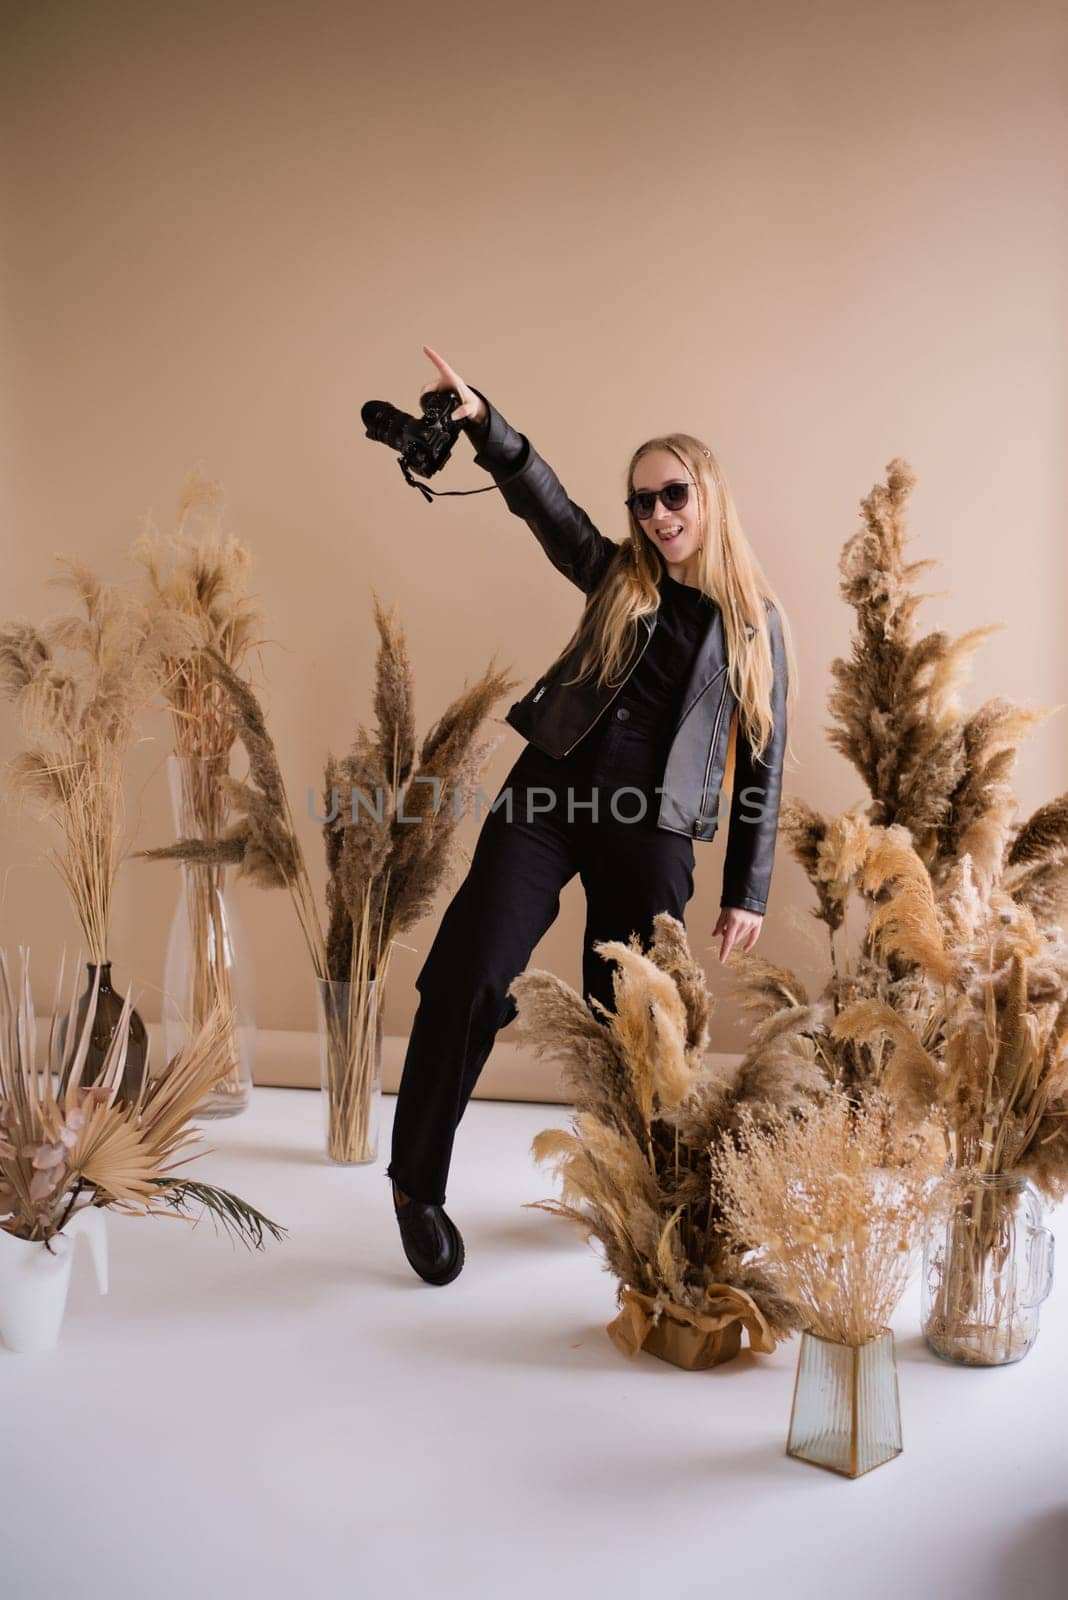 A crazy woman photographer, a blonde with a camera, happy and smiling in the production studio. Wearing a black clothes on a brown background